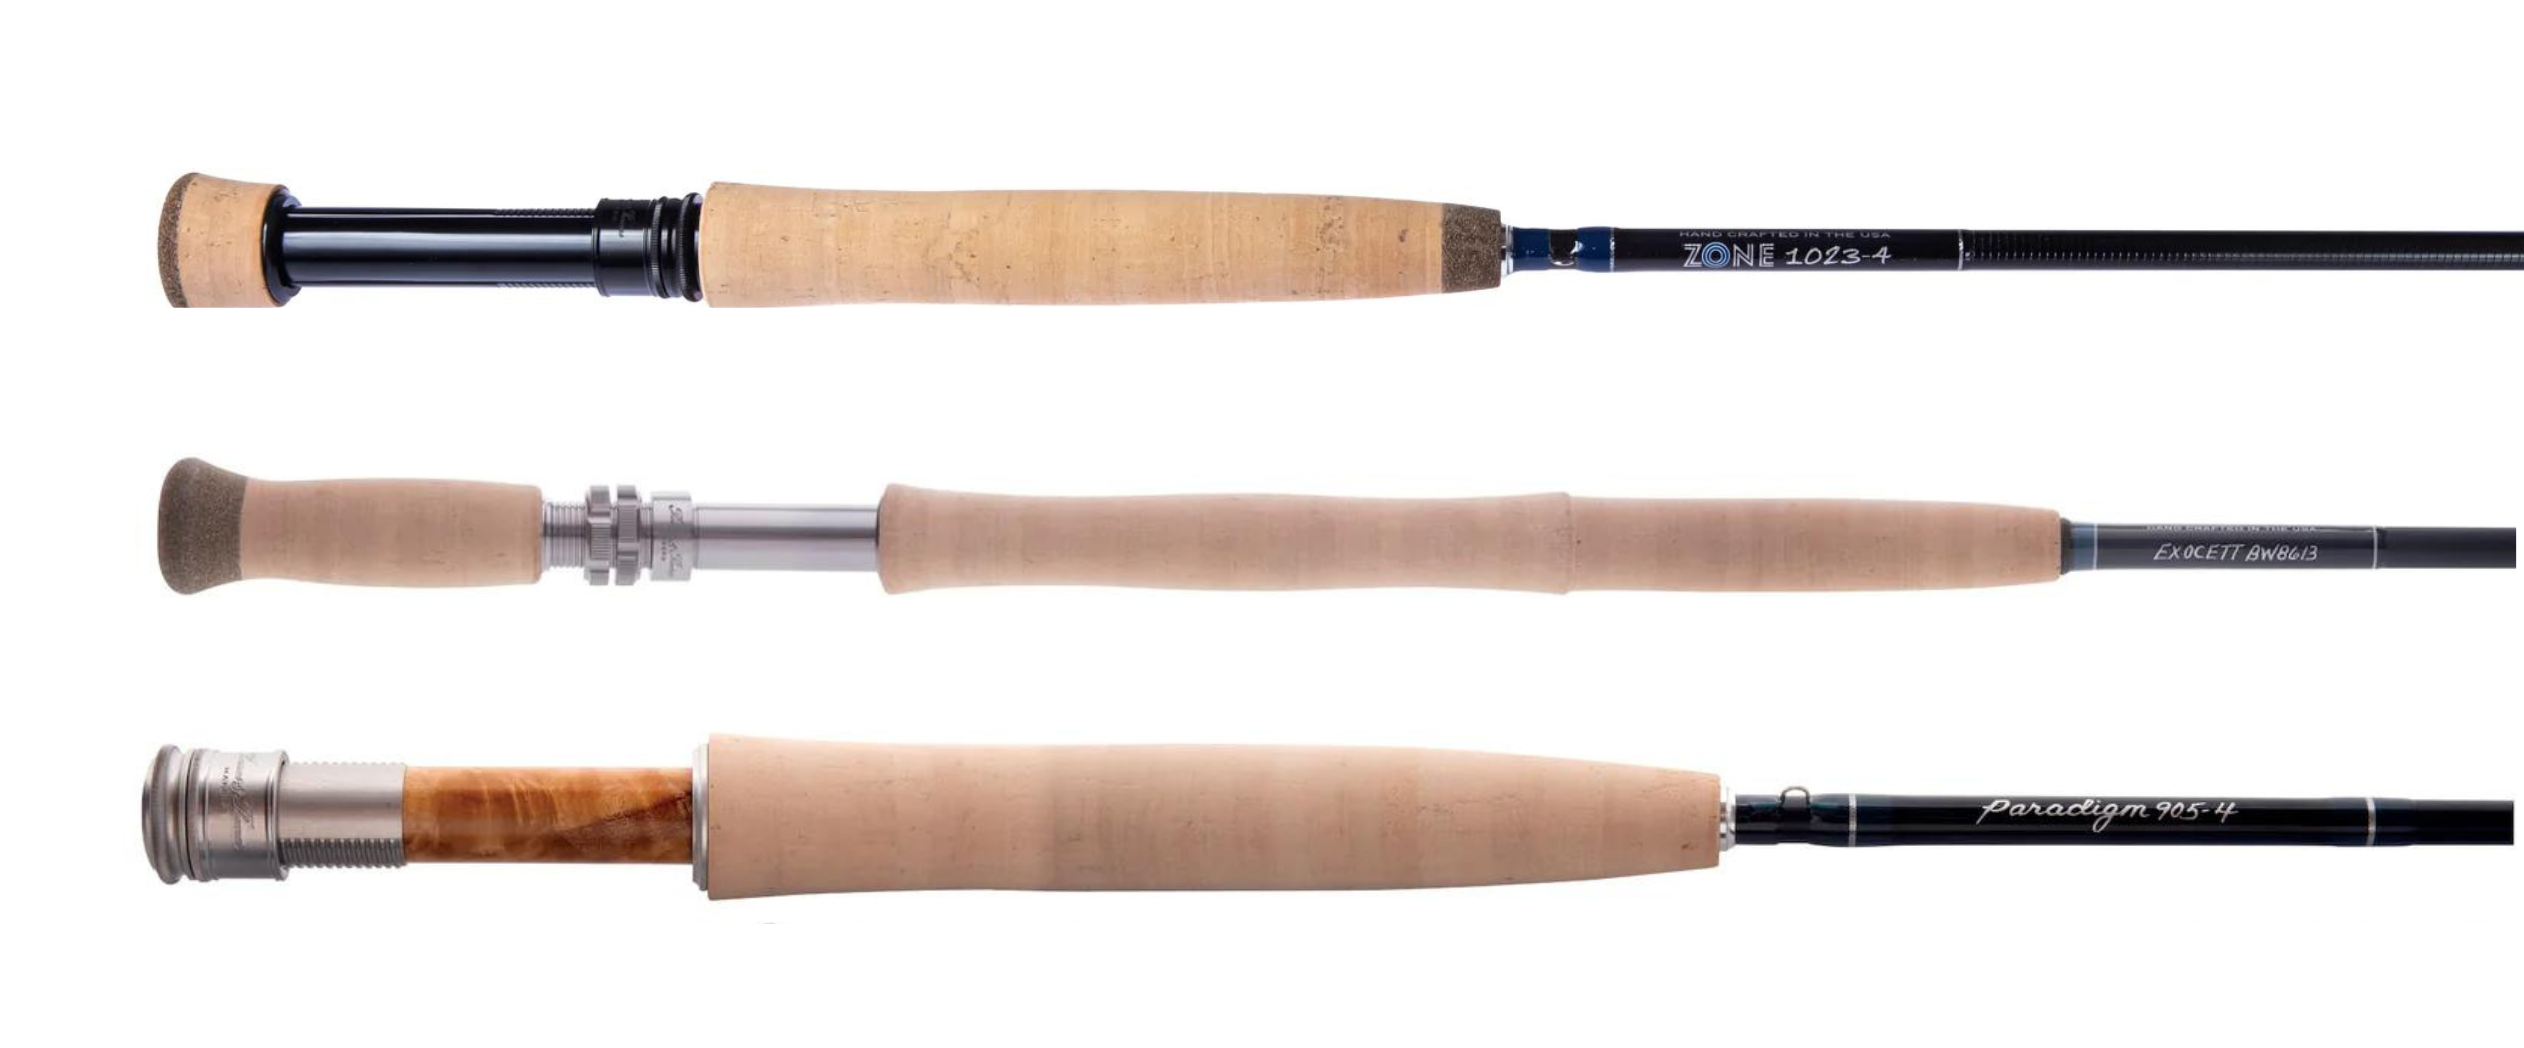 Shop Thomas & Thomas Fly Rods: Sextant, Avantt, and More